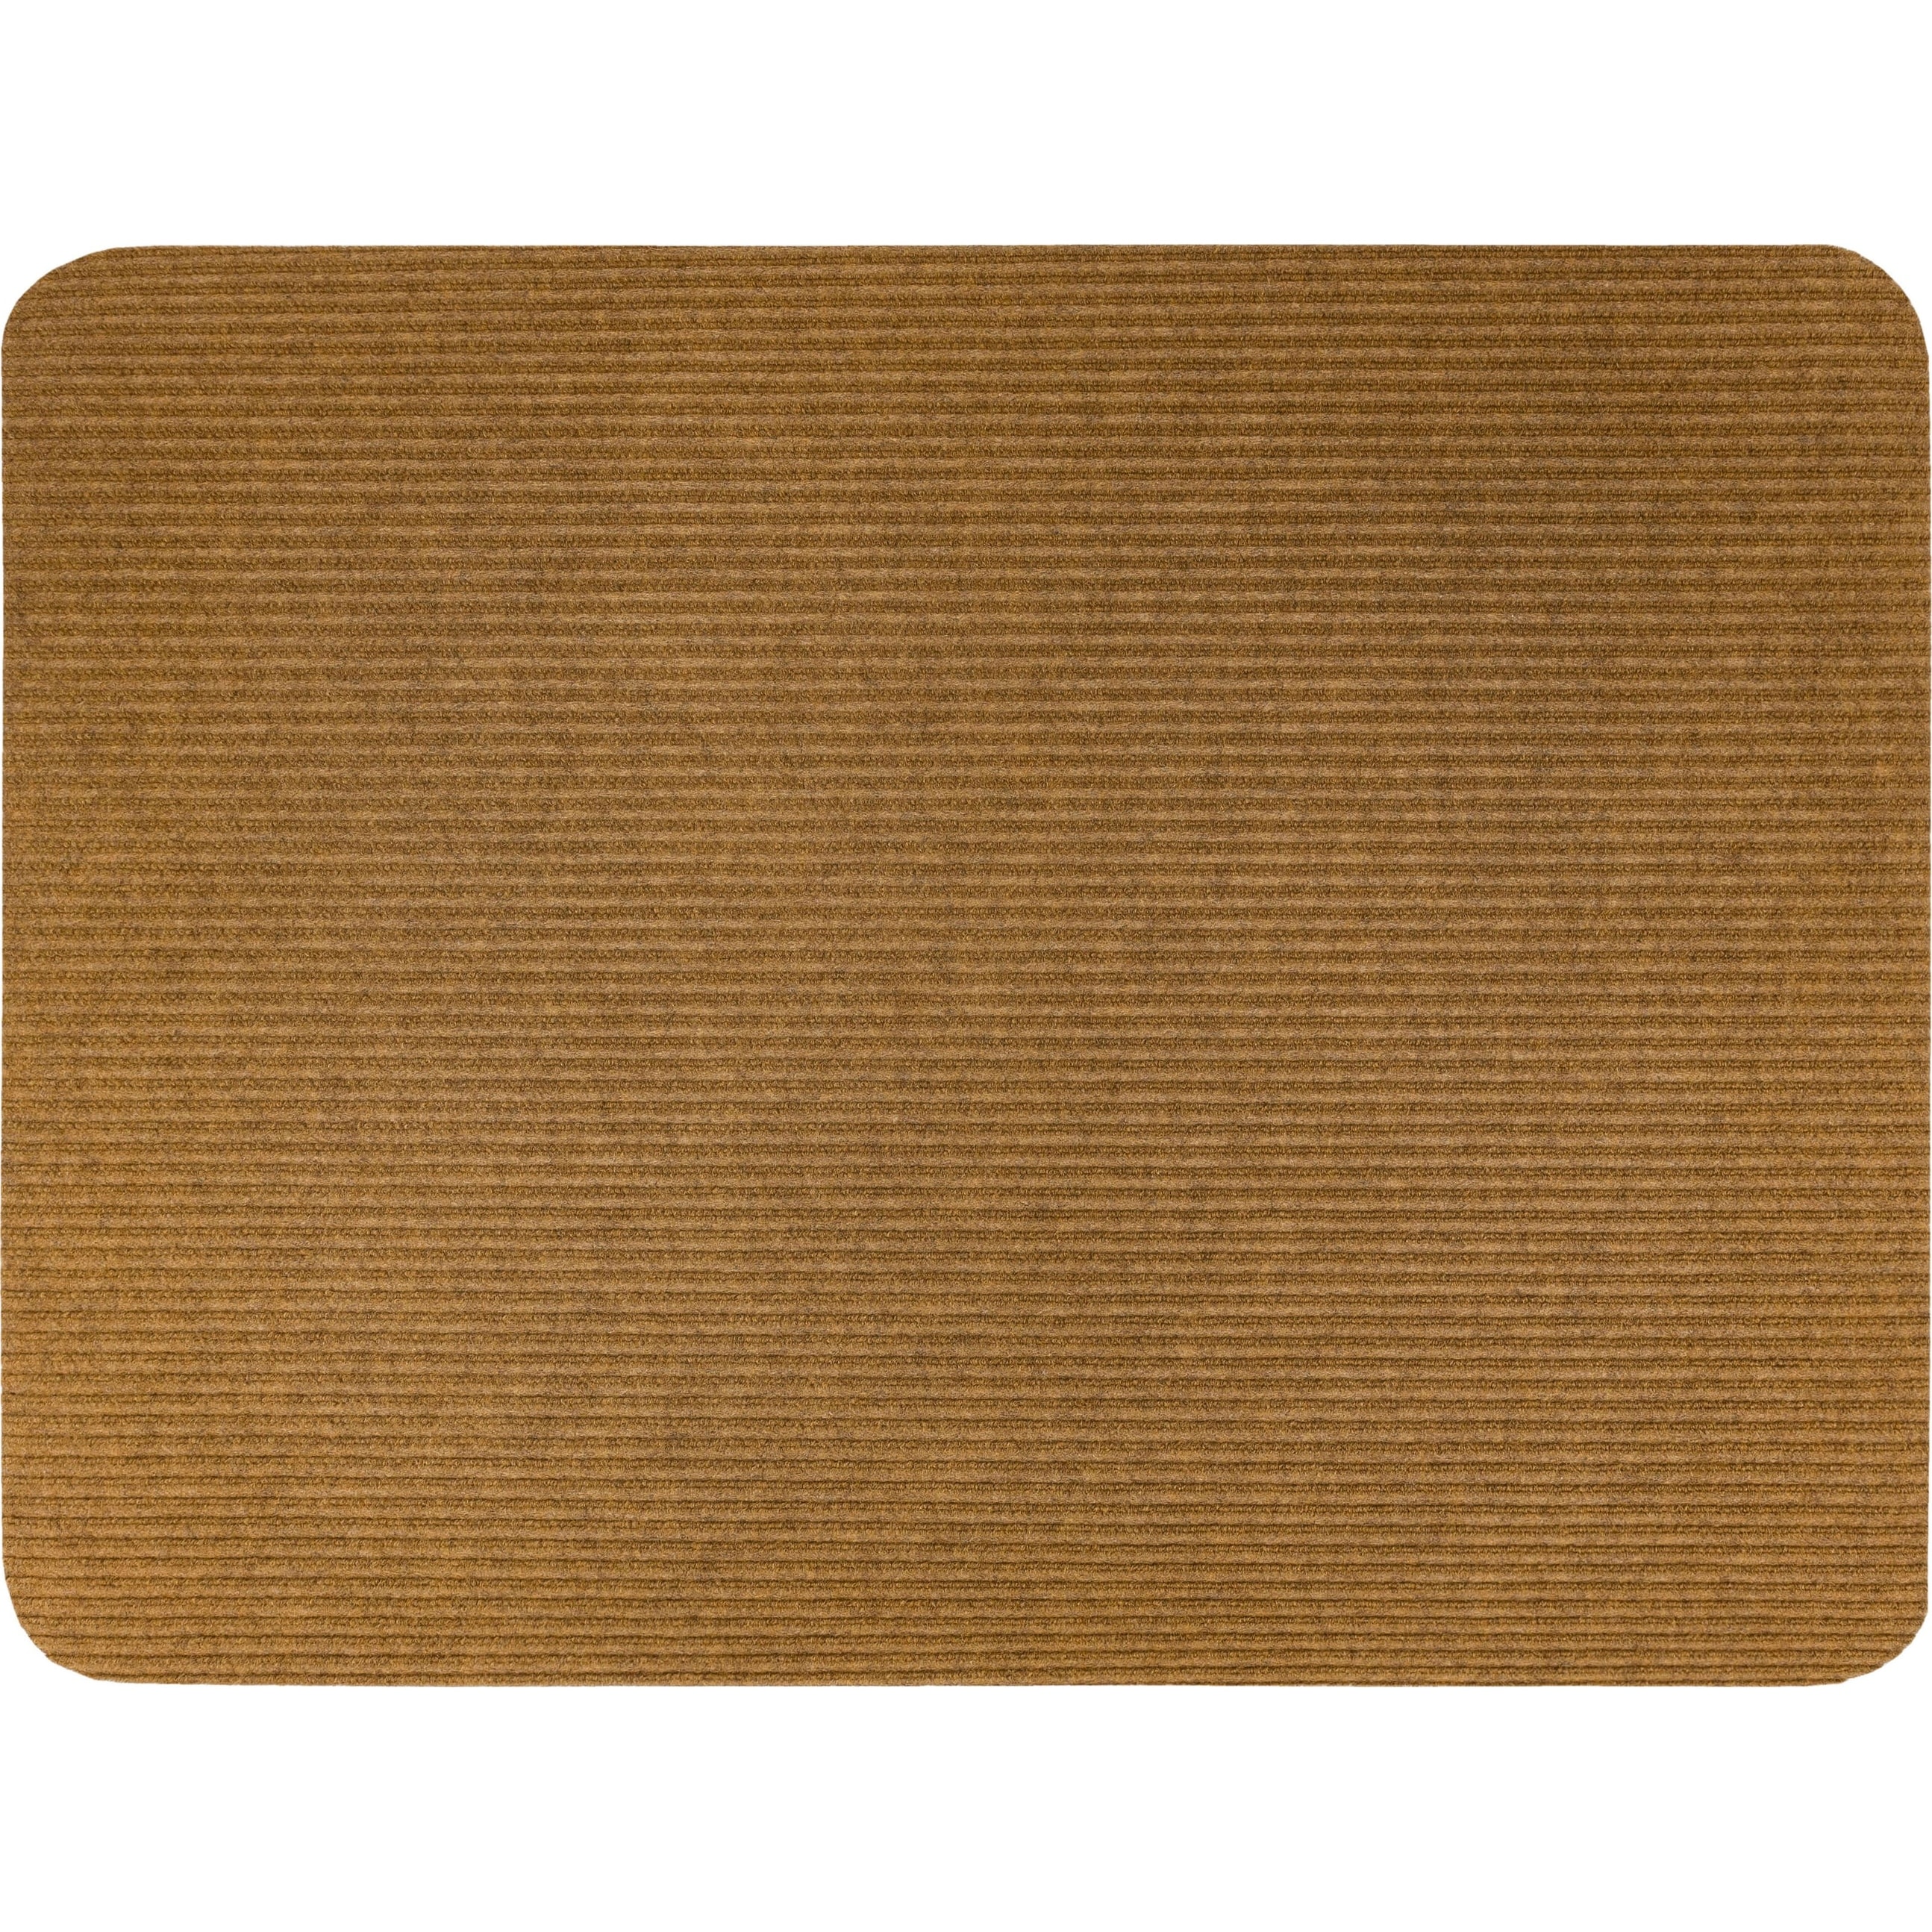 https://ak1.ostkcdn.com/images/products/is/images/direct/94f534c08f72aeaadcc1811eefea90e555145171/Mohawk-Home-Utility-Floor-Mat-for-Garage%2C-Entryway%2C-Porch%2C-and-Laundry-Room.jpg